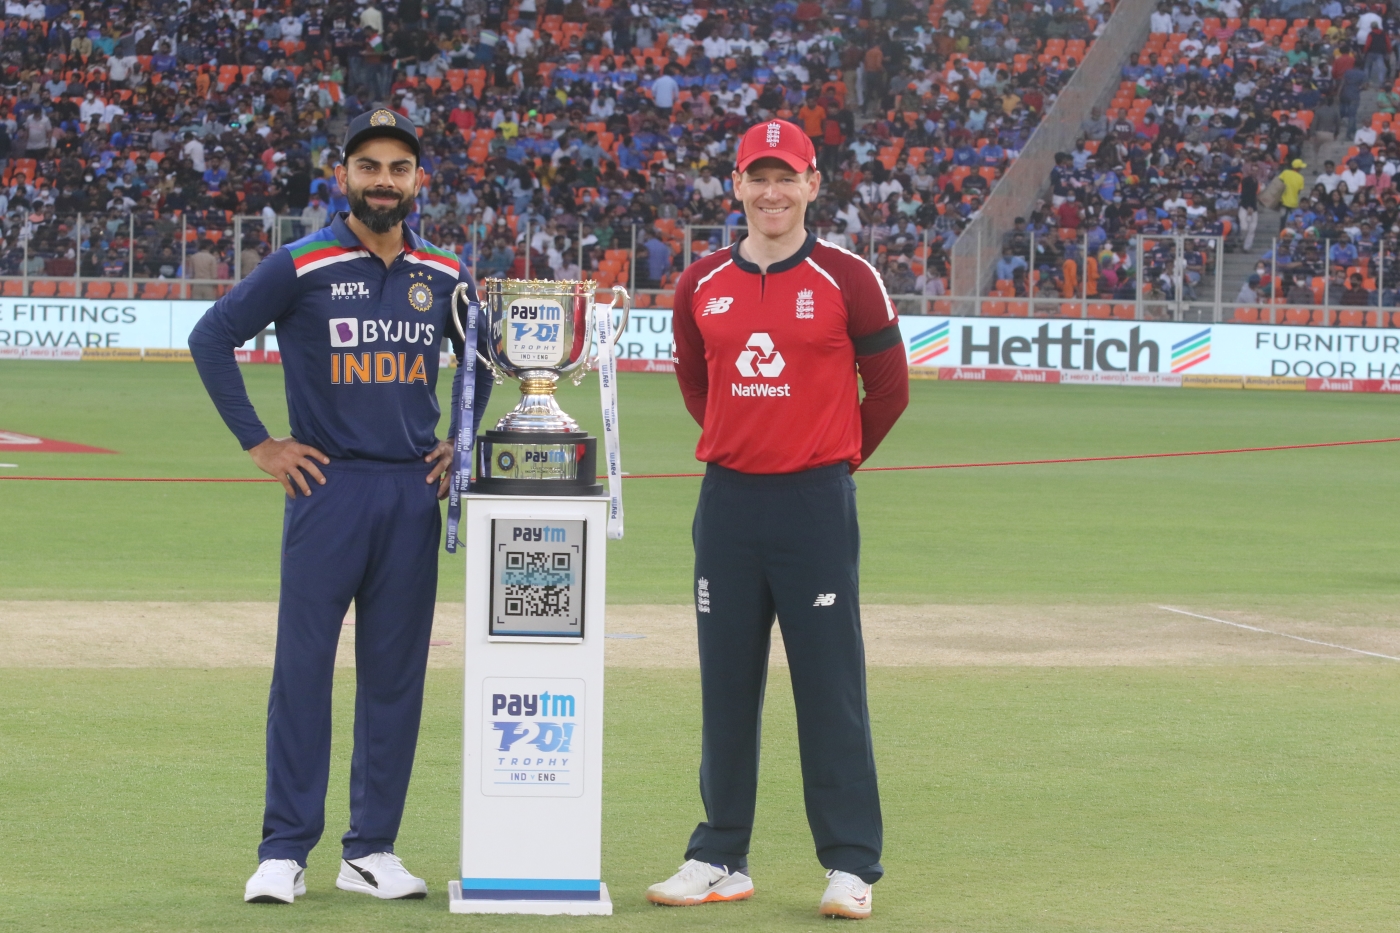 Virat Kohli and Eoin Morgan will clash to win the series | Getty